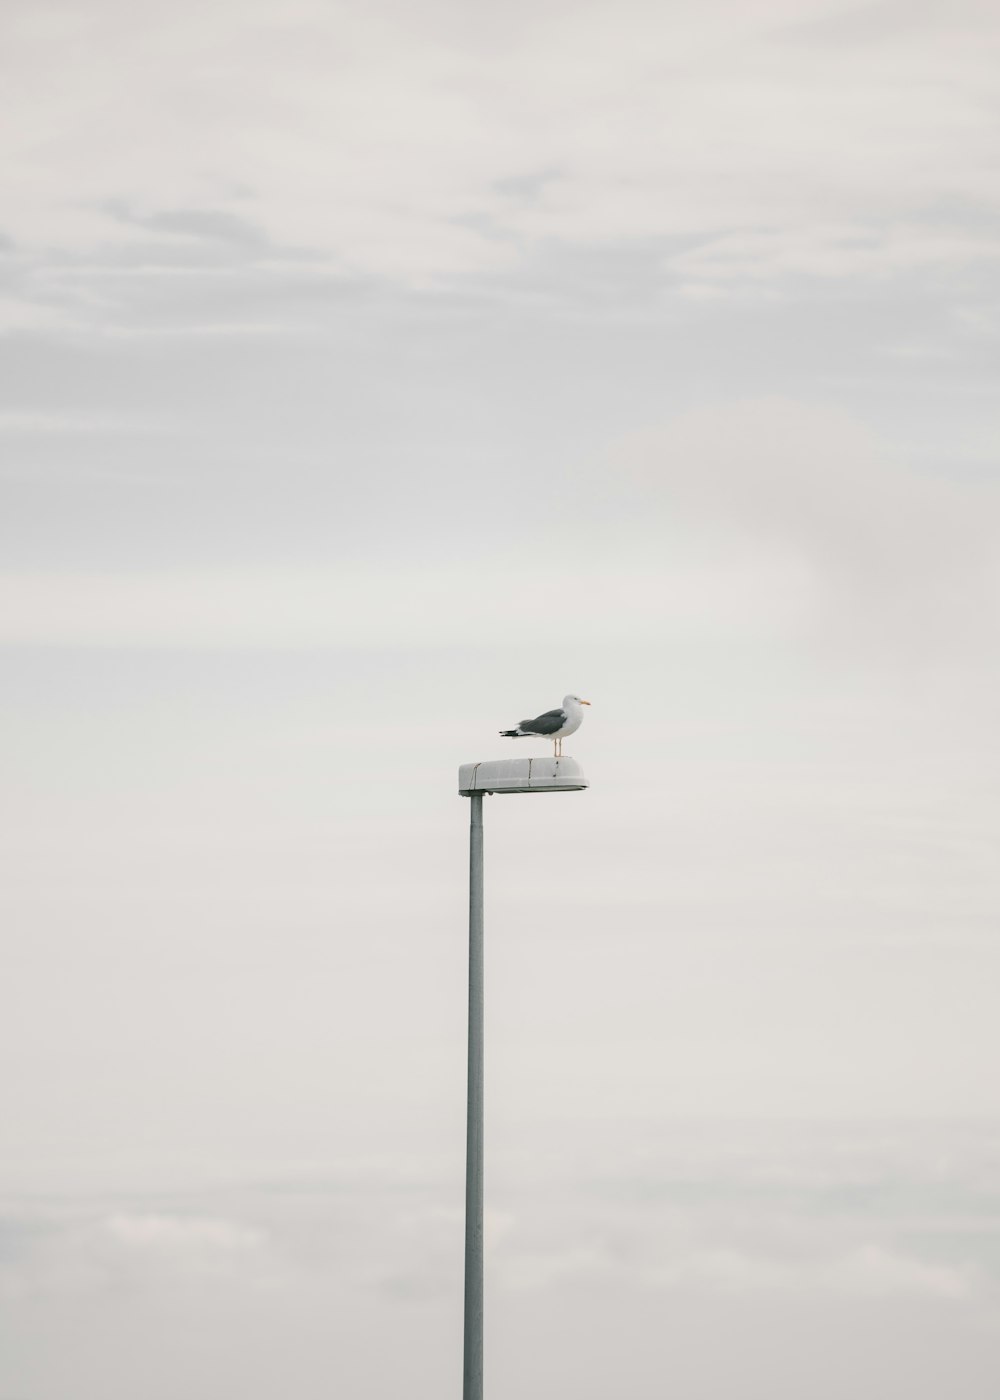 a seagull sitting on top of a light pole